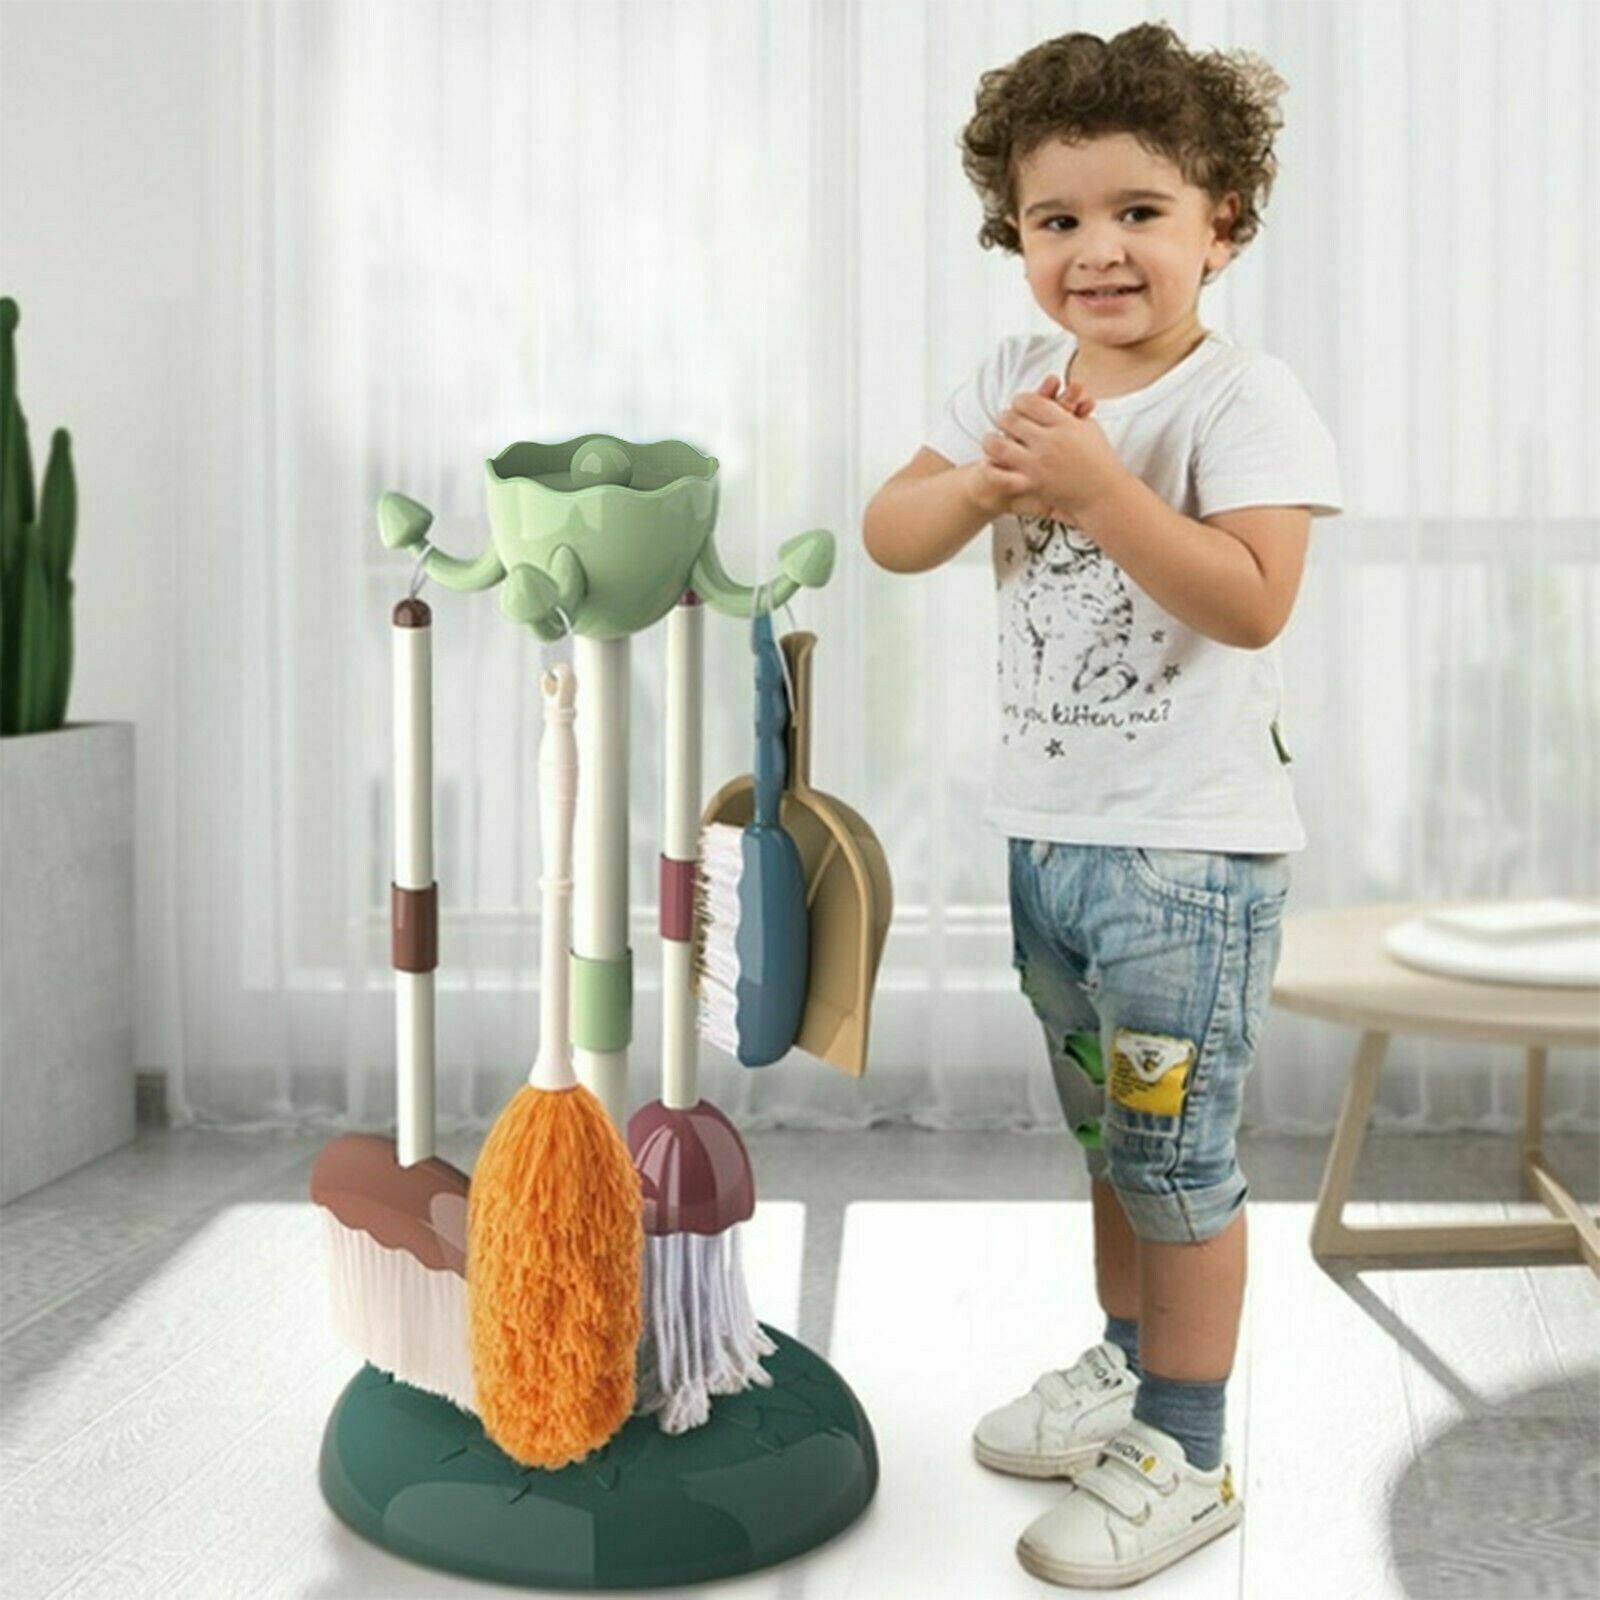 Little Dustman 5 Piece Cleaning Play Set The Magic Toy Shop - The Magic Toy Shop